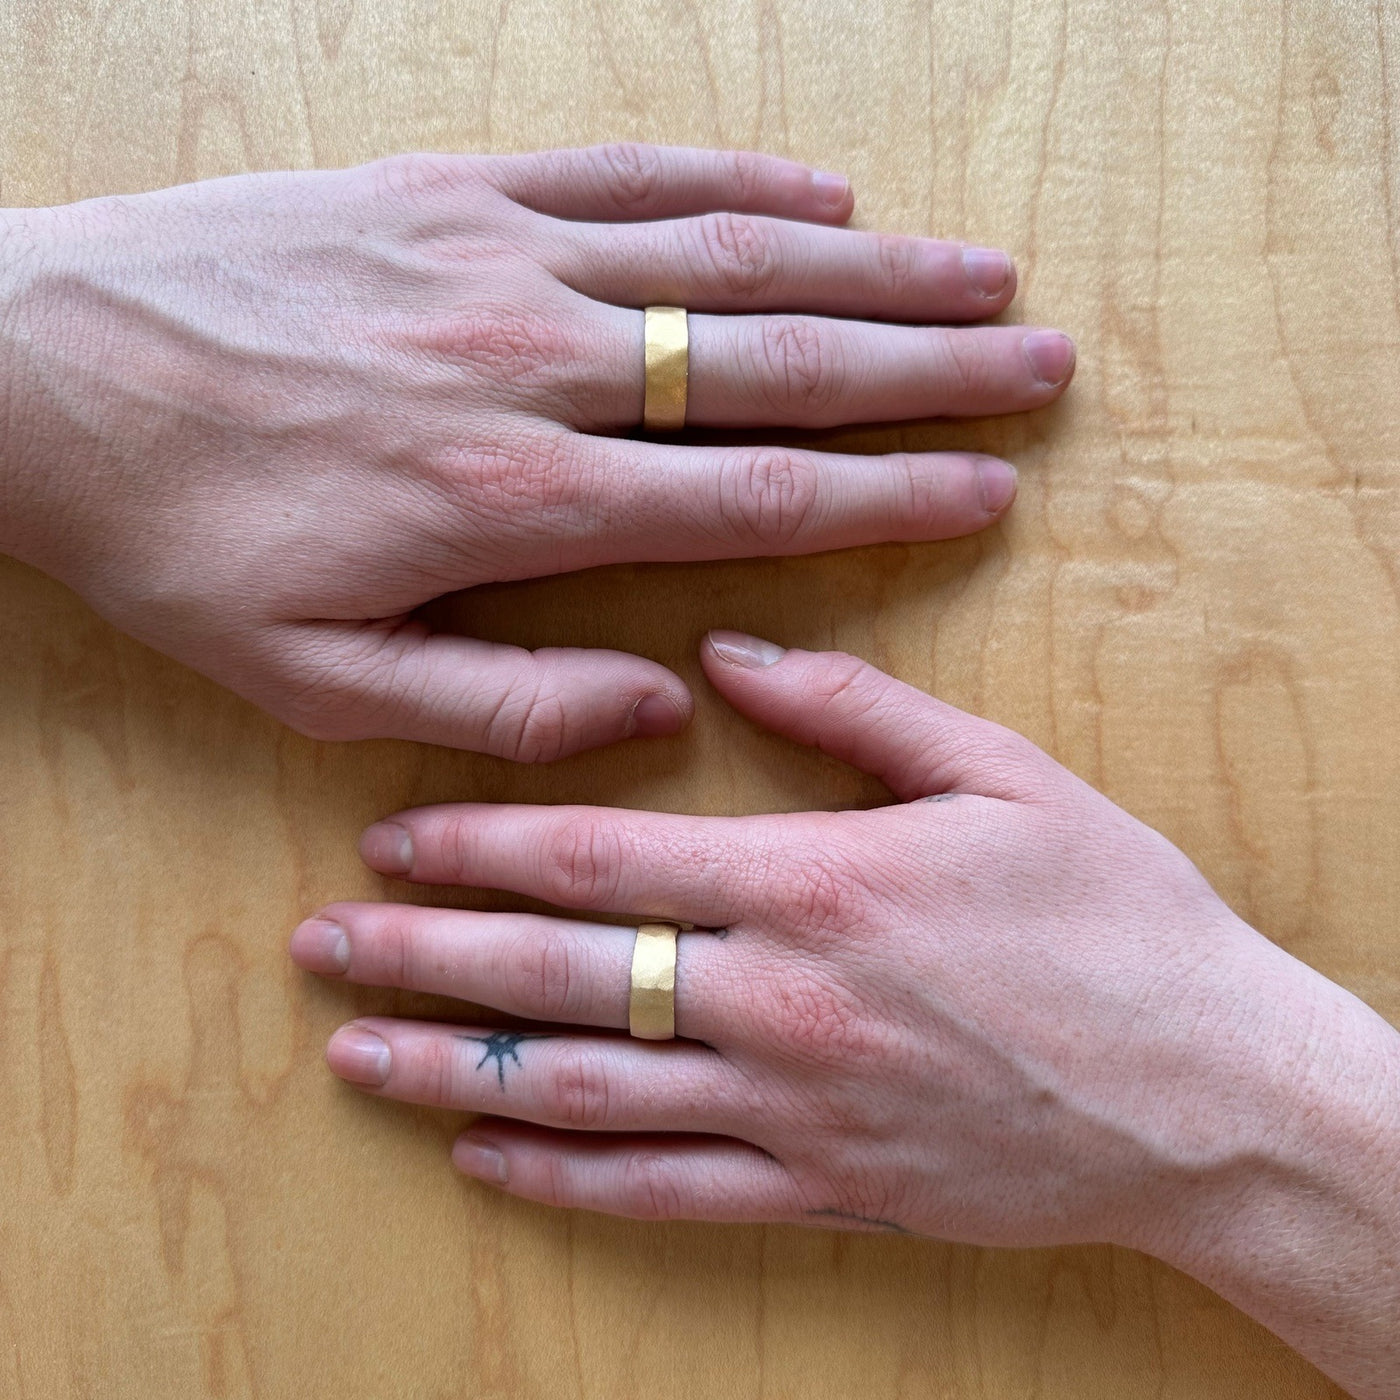 Sandstone Yellow Gold Wide Band